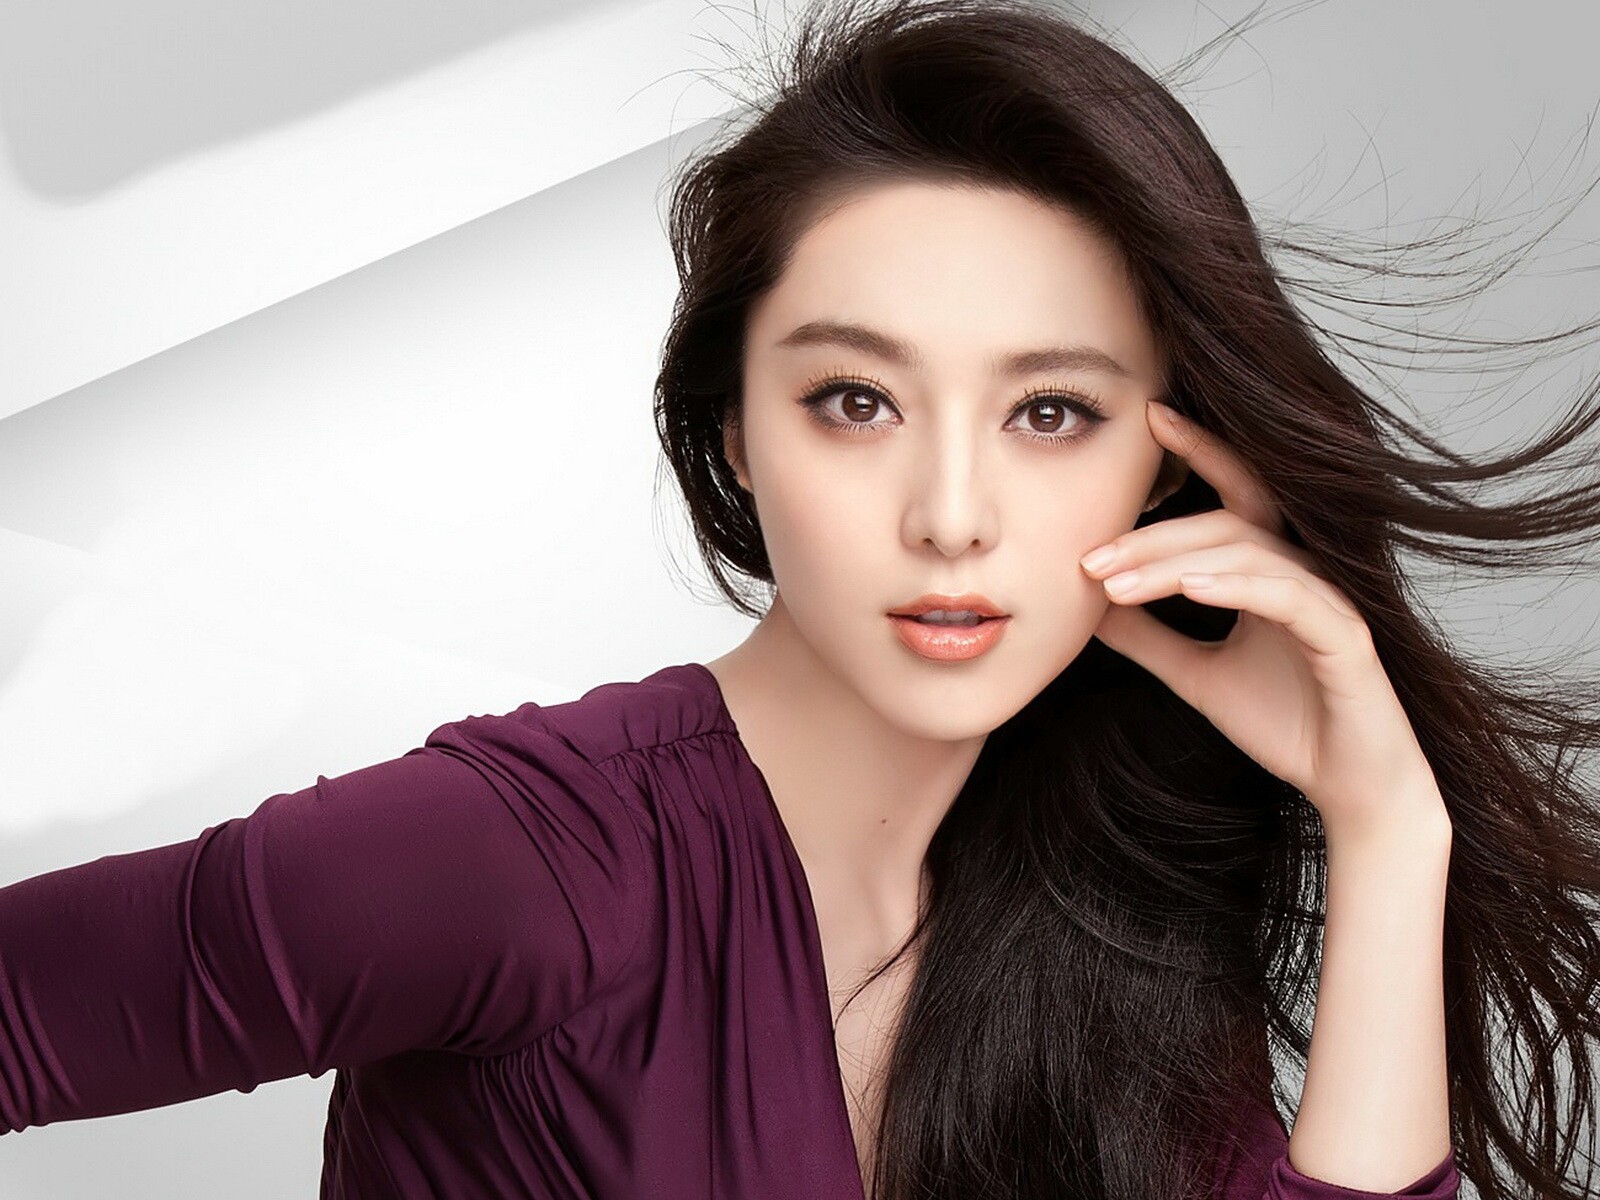 Chinese actress Fan Bingbing starred in the recent "X-Men: Days of Future Past." (Photo: Singpost)